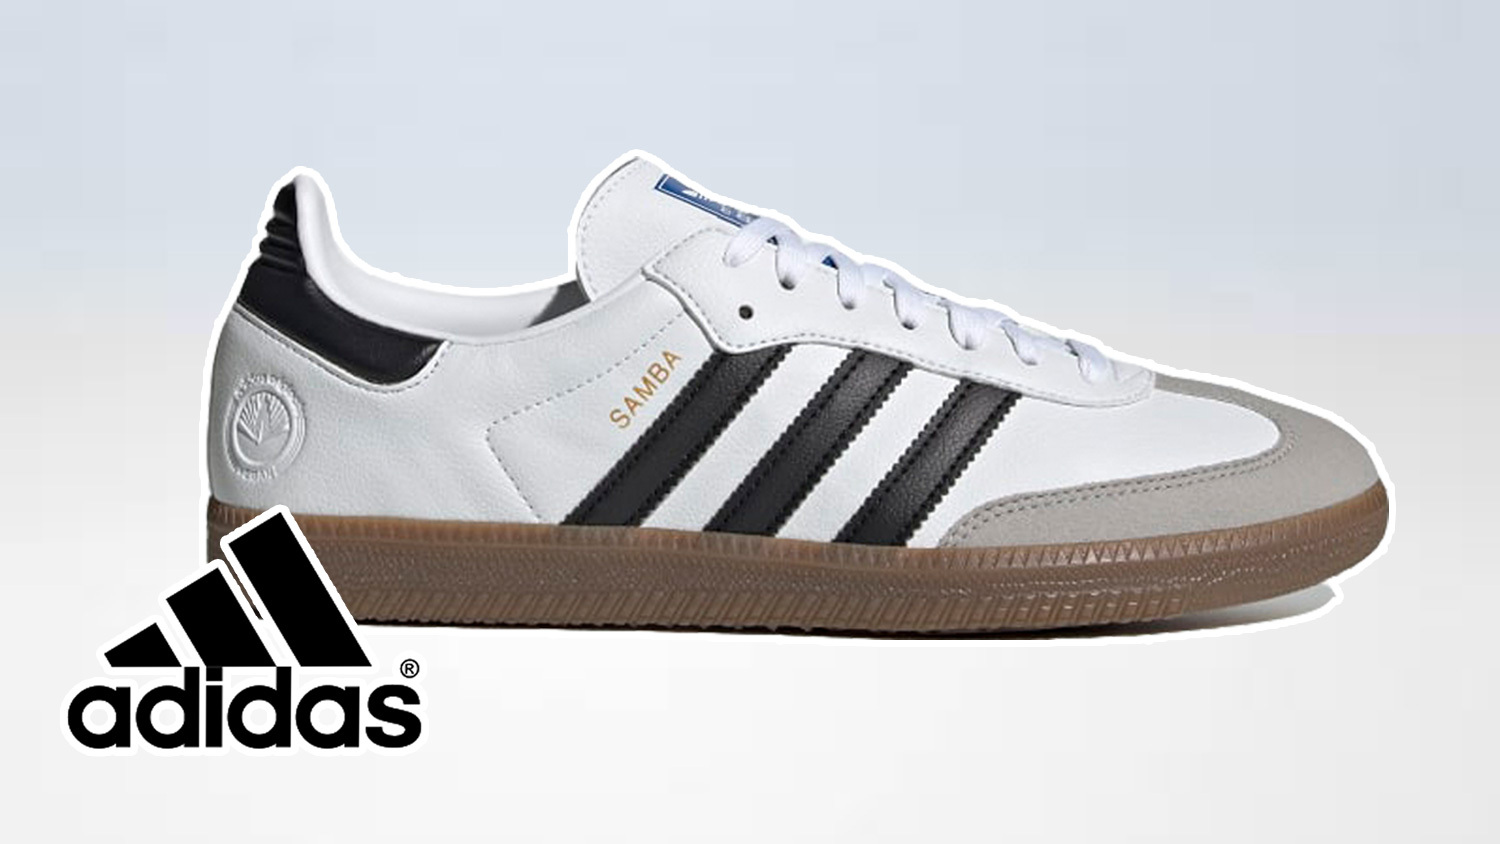 Are Adidas Shoes Made of Leather?